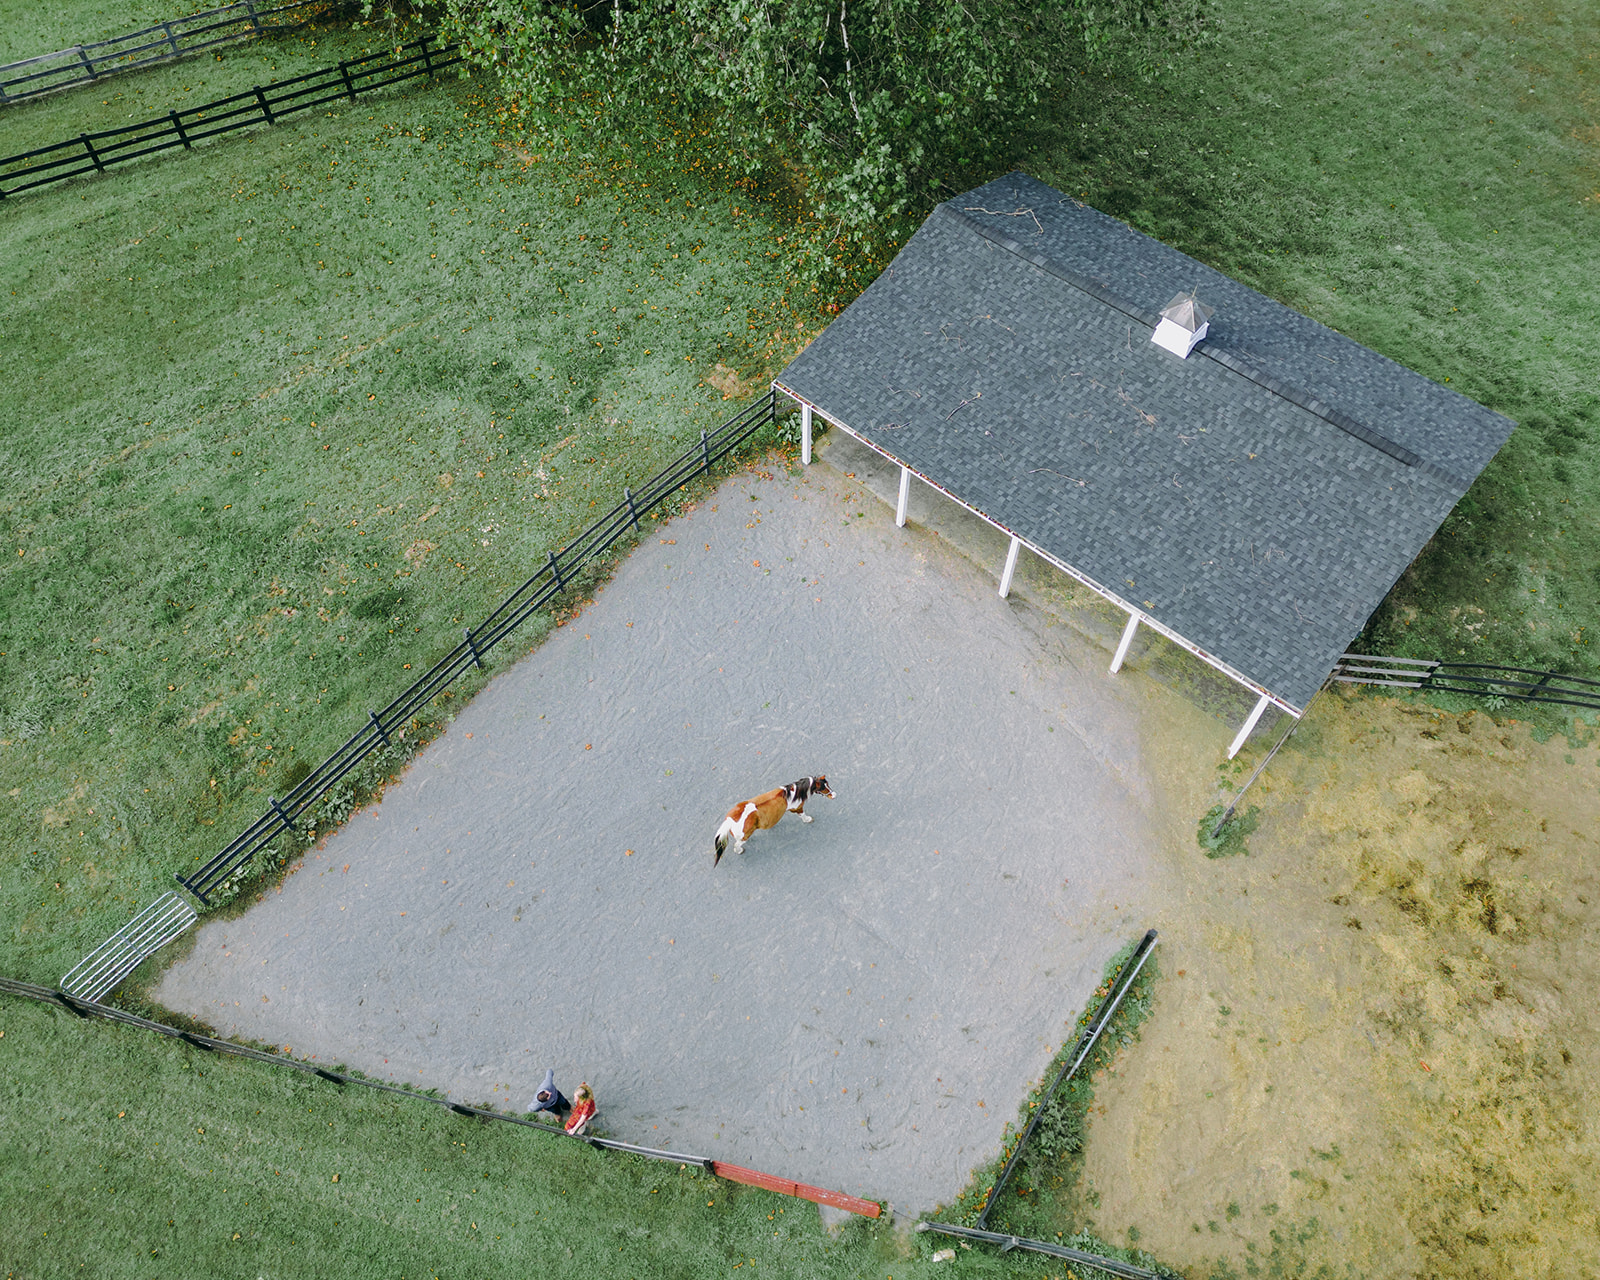 horse photo on drone